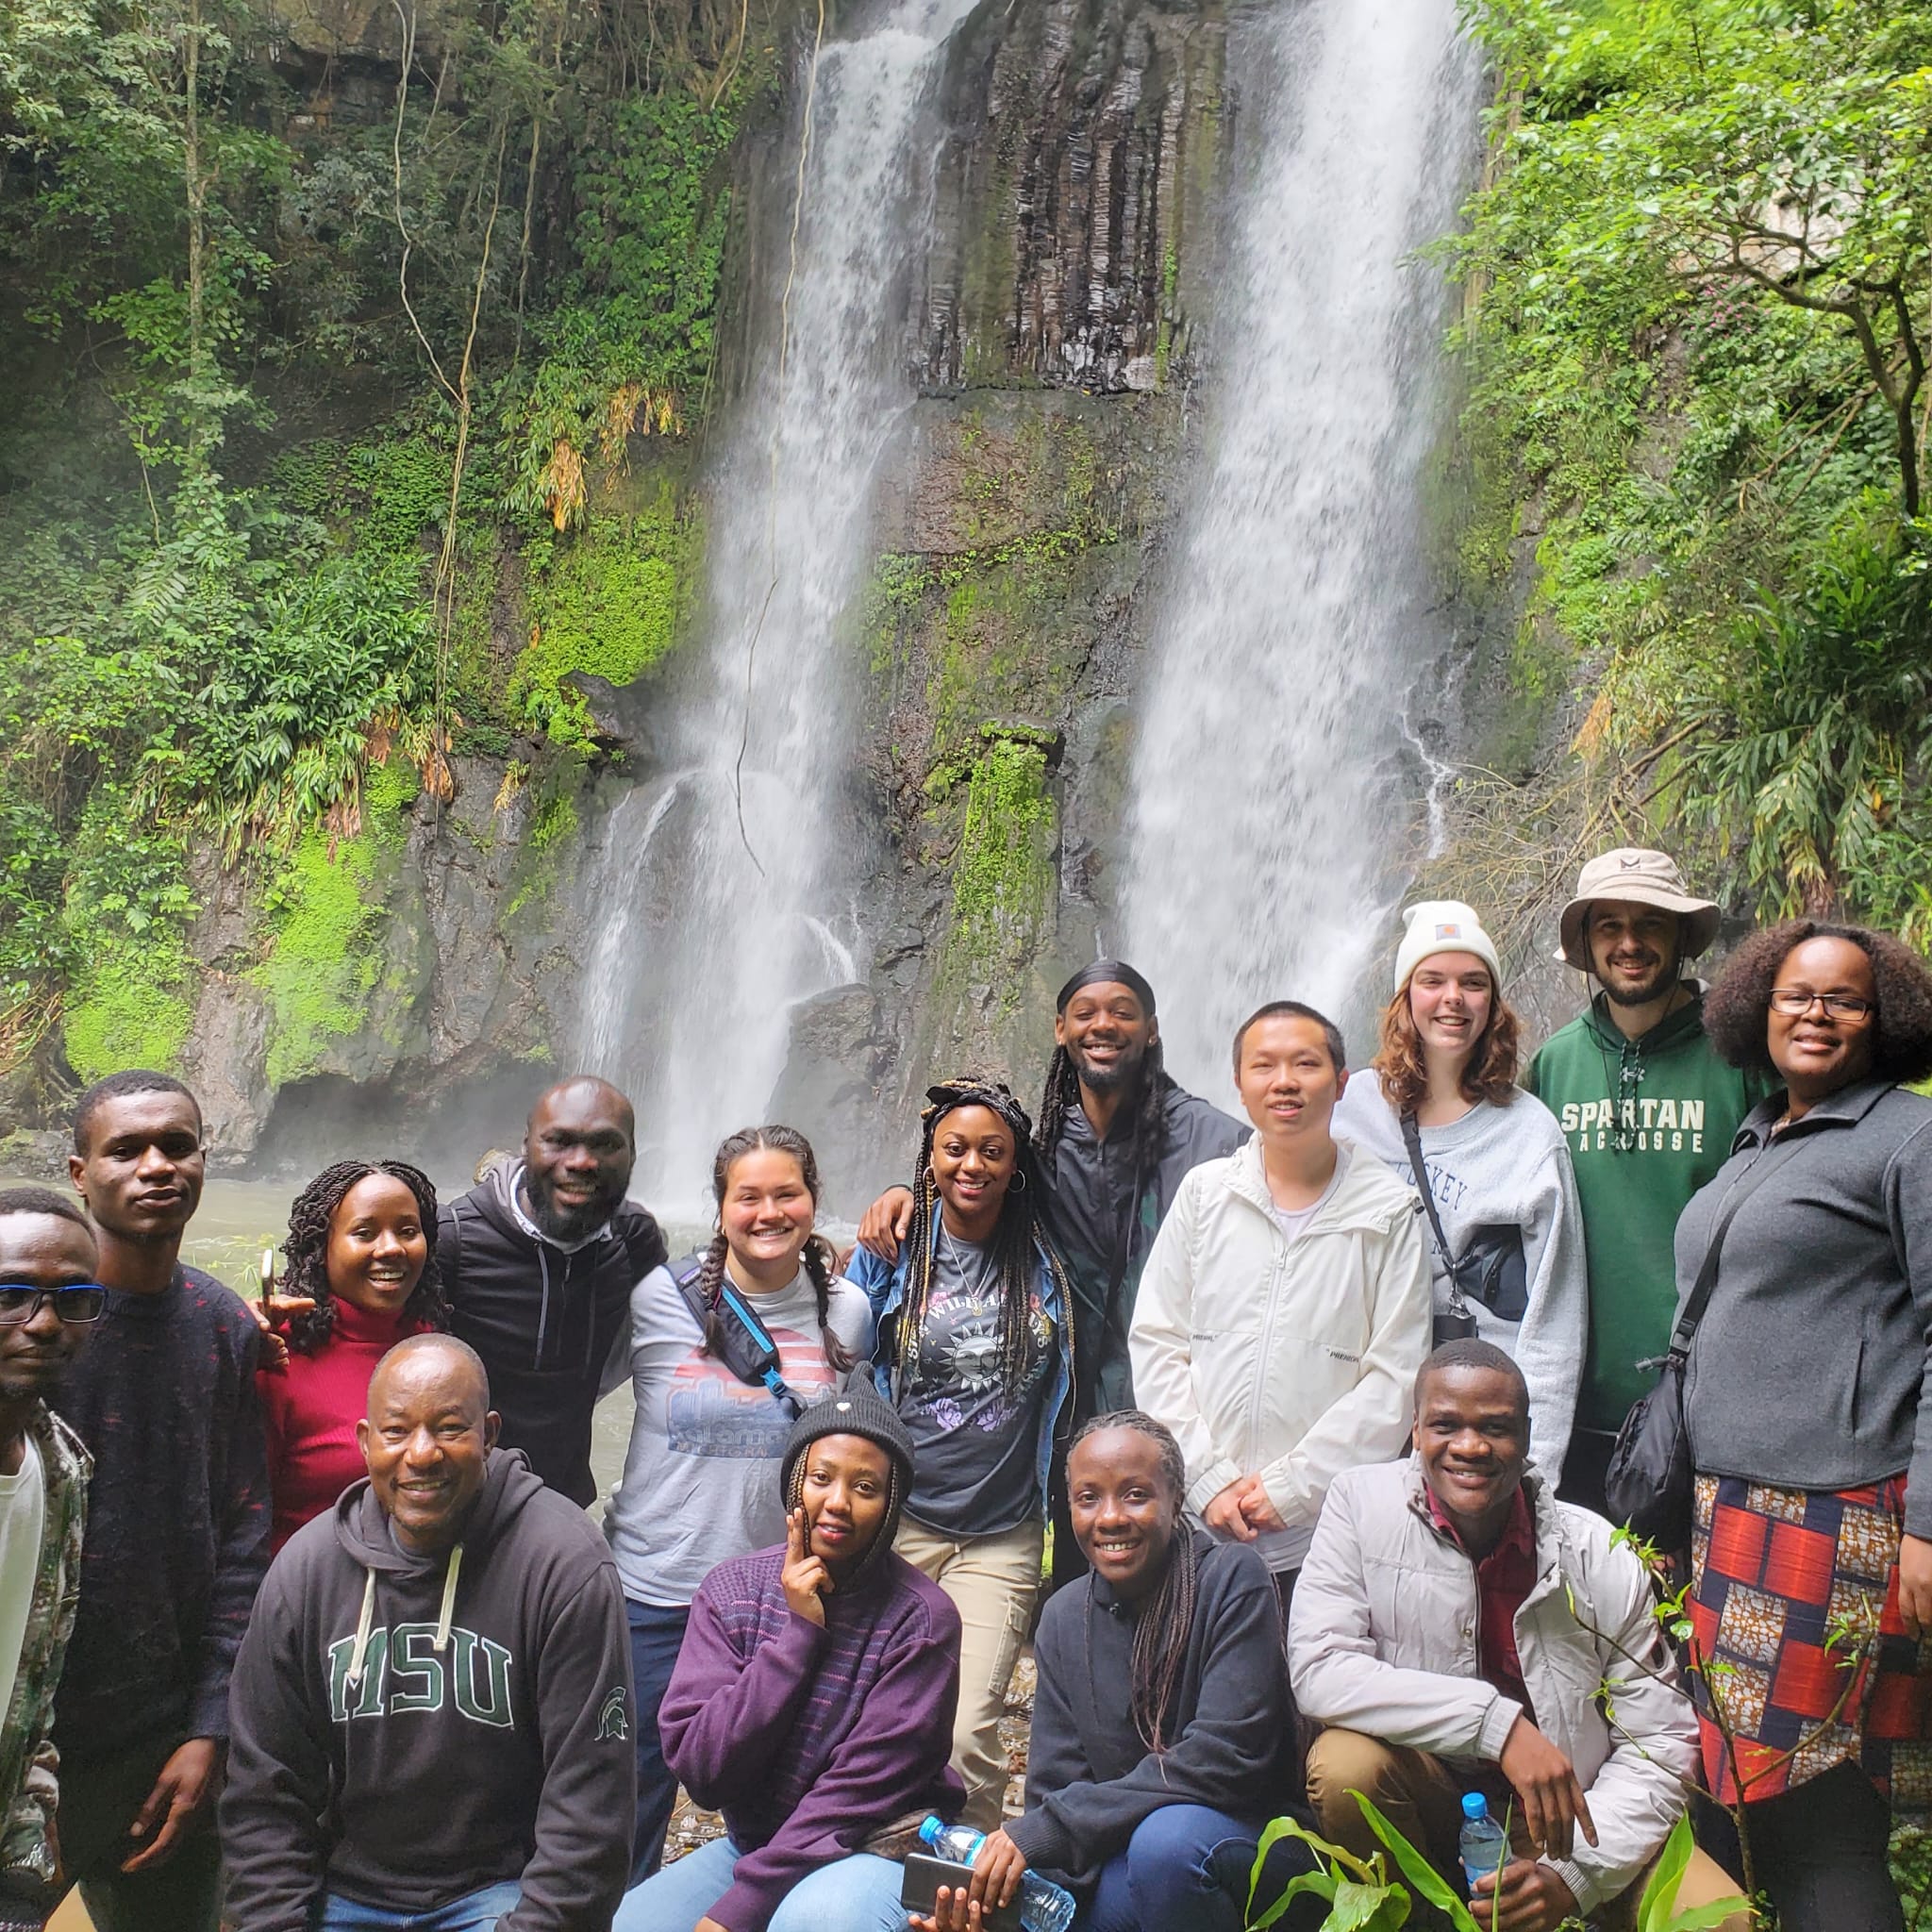 Jonathan Choti (front left, wearing MSU sweatshirt) is joined by students from MSU, the University of Dar es Salaam, and Sokoine University of Agriculture during a six-week study abroad program in Tanzania.